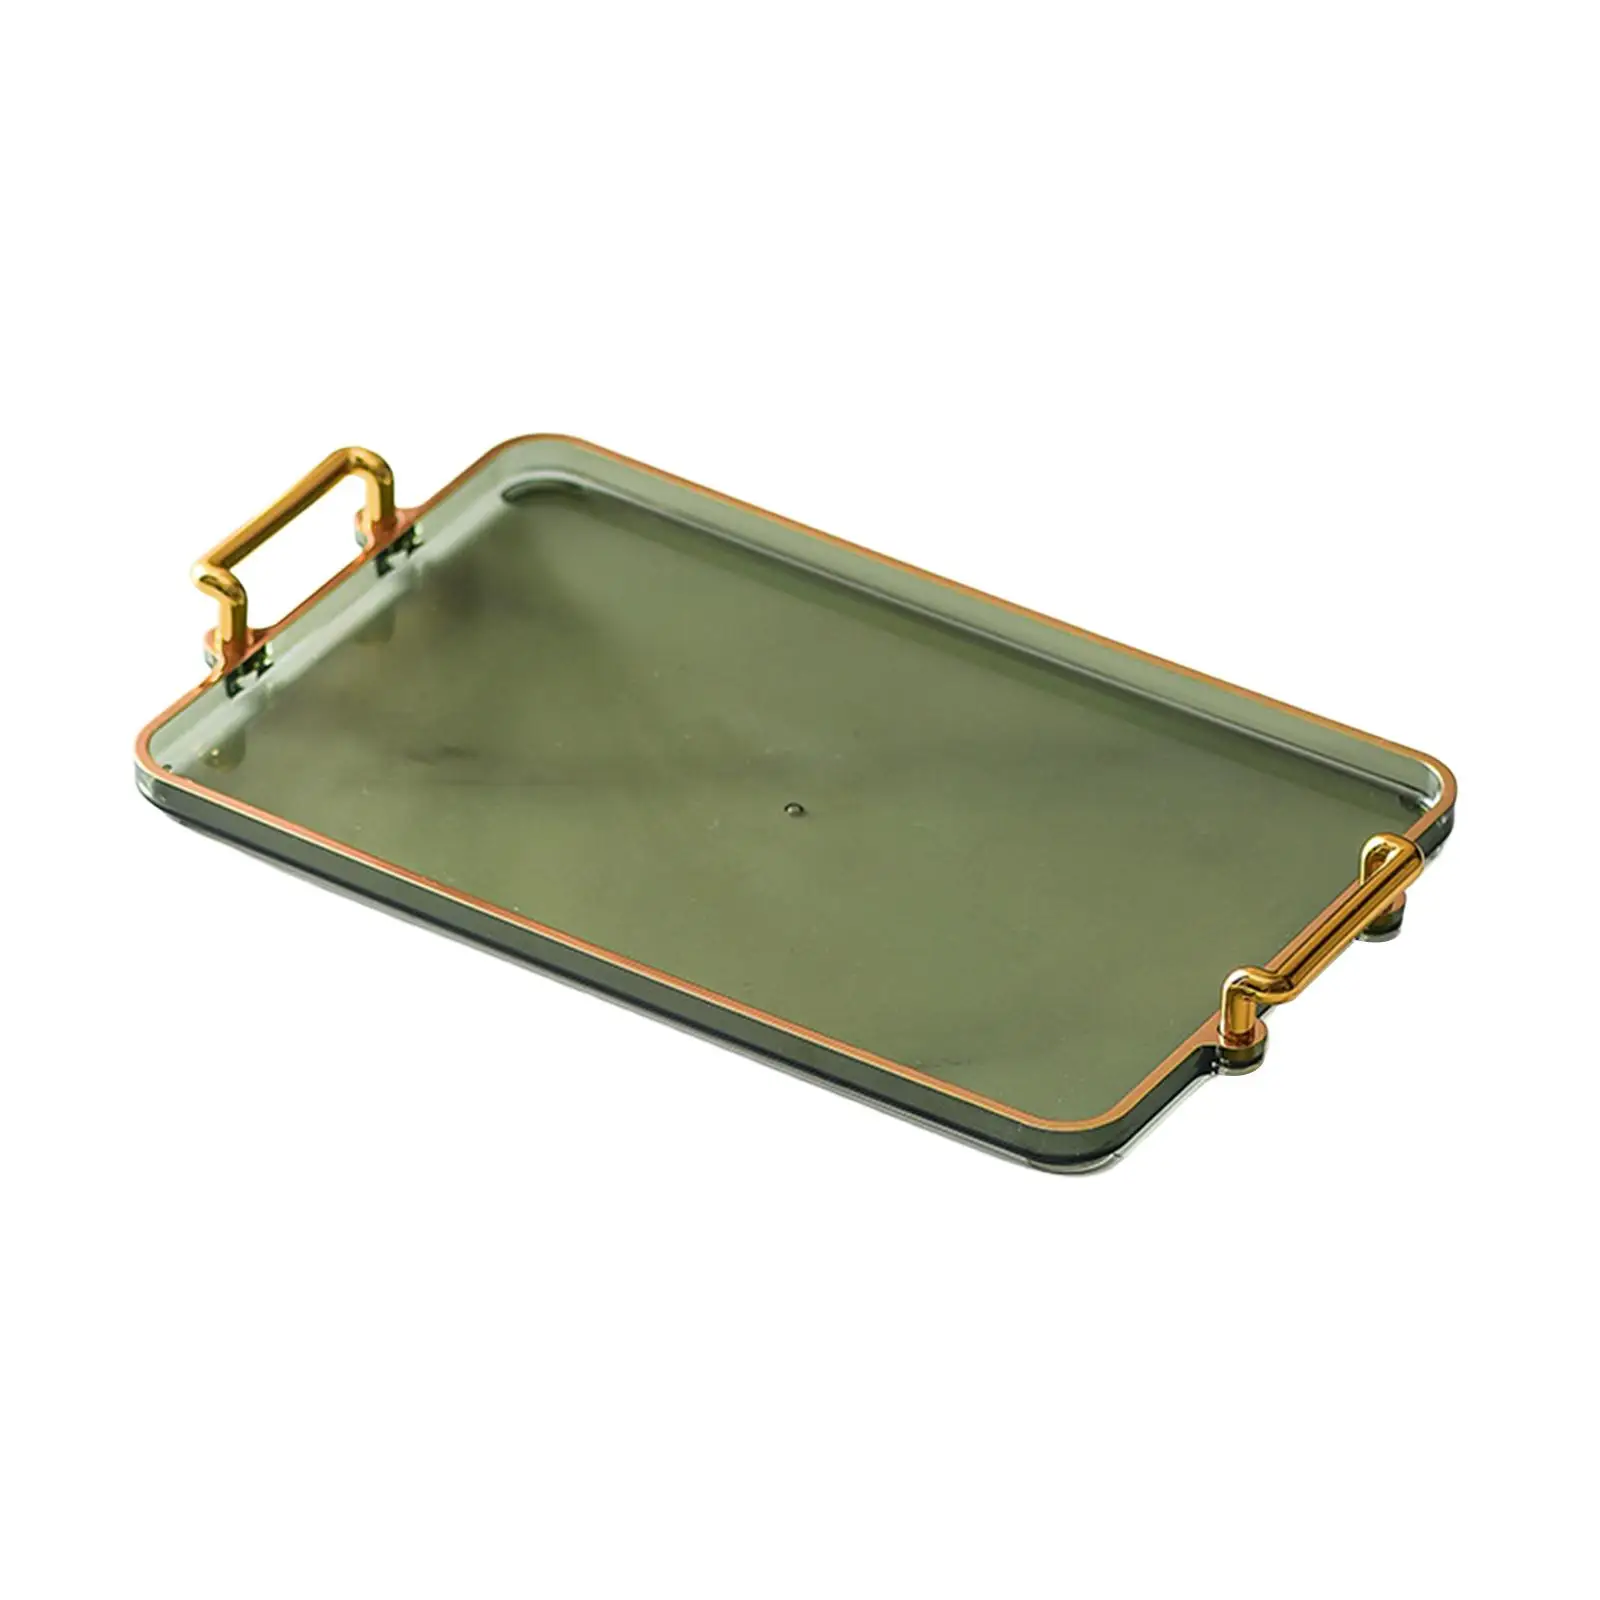 Farmhouse Serving Tray Shower Caddy Plate Jewelry Perfume Cosmetics Holders Multifunction with Handles for Bathroom Home Office